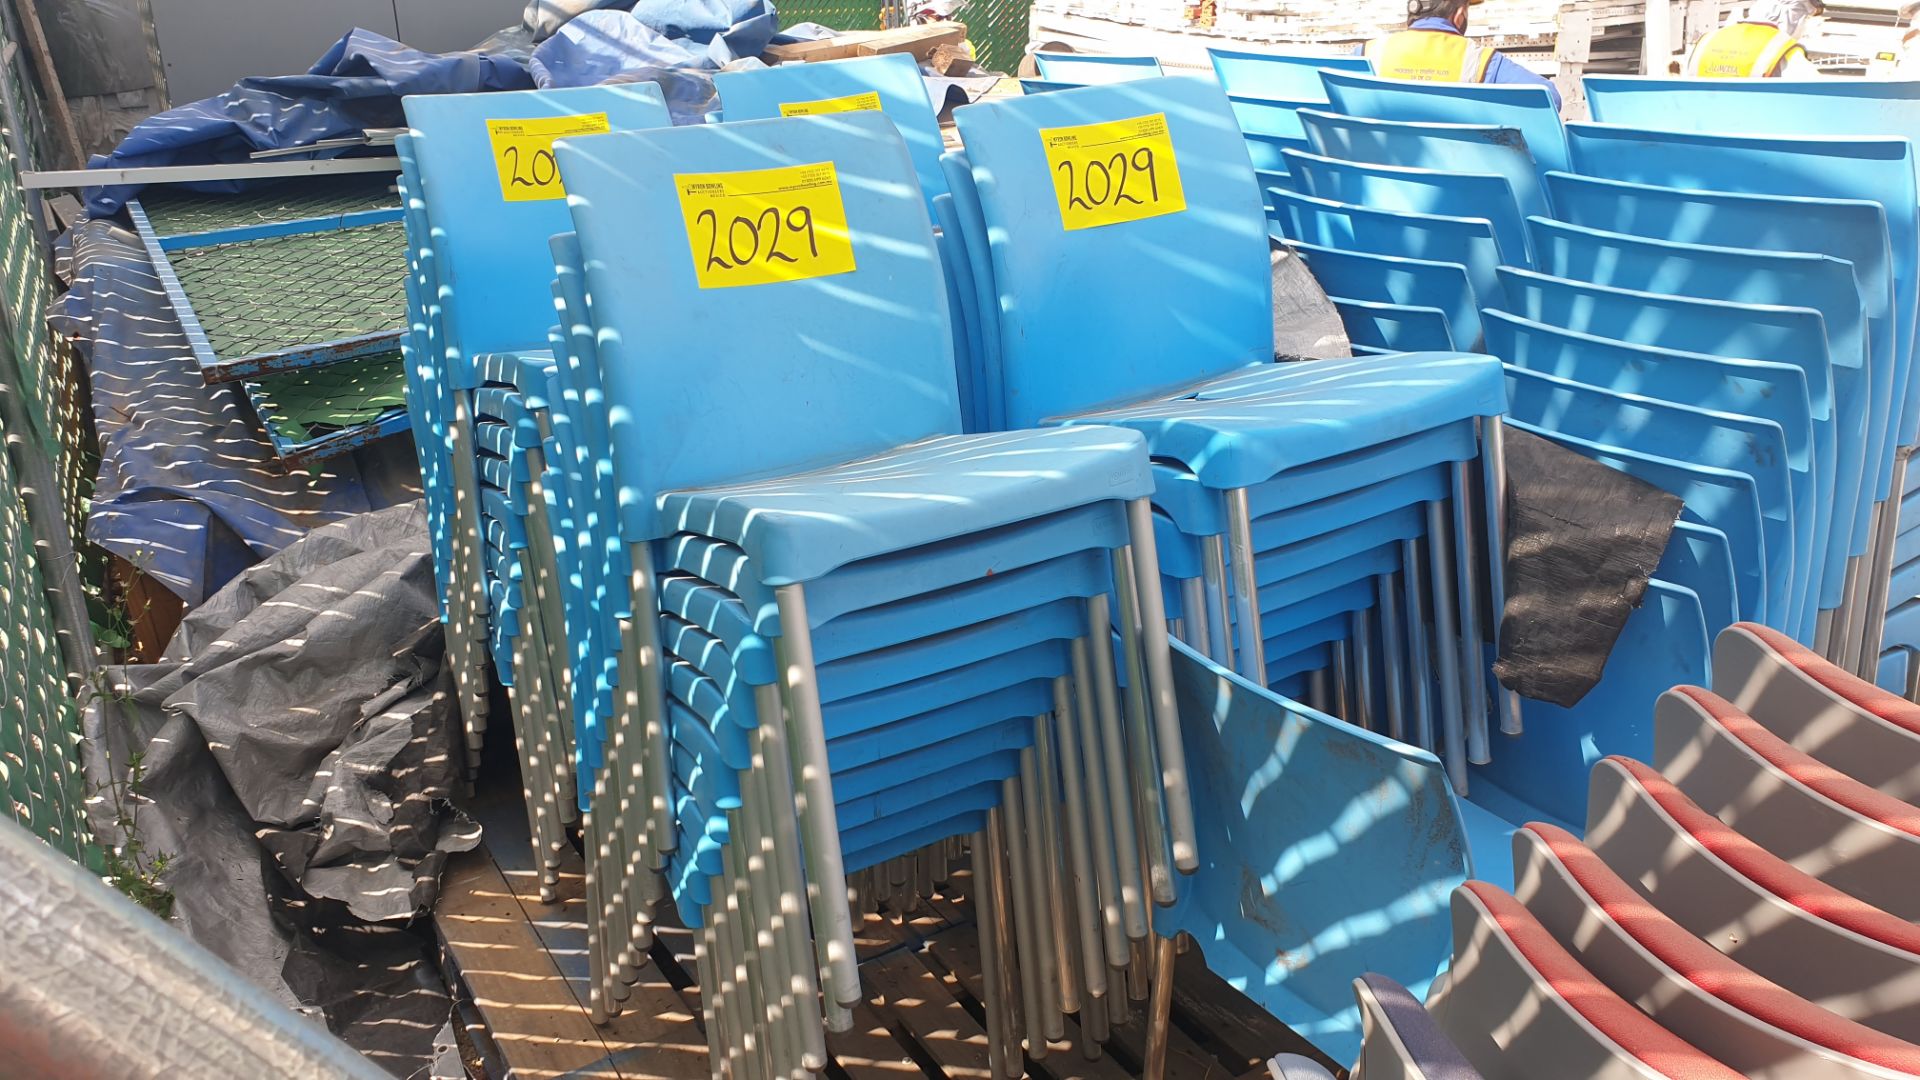 1 Lote of 40 blue plastic chairs, 7 metal chairs for office with backrest and upholstered seat - Bild 22 aus 22